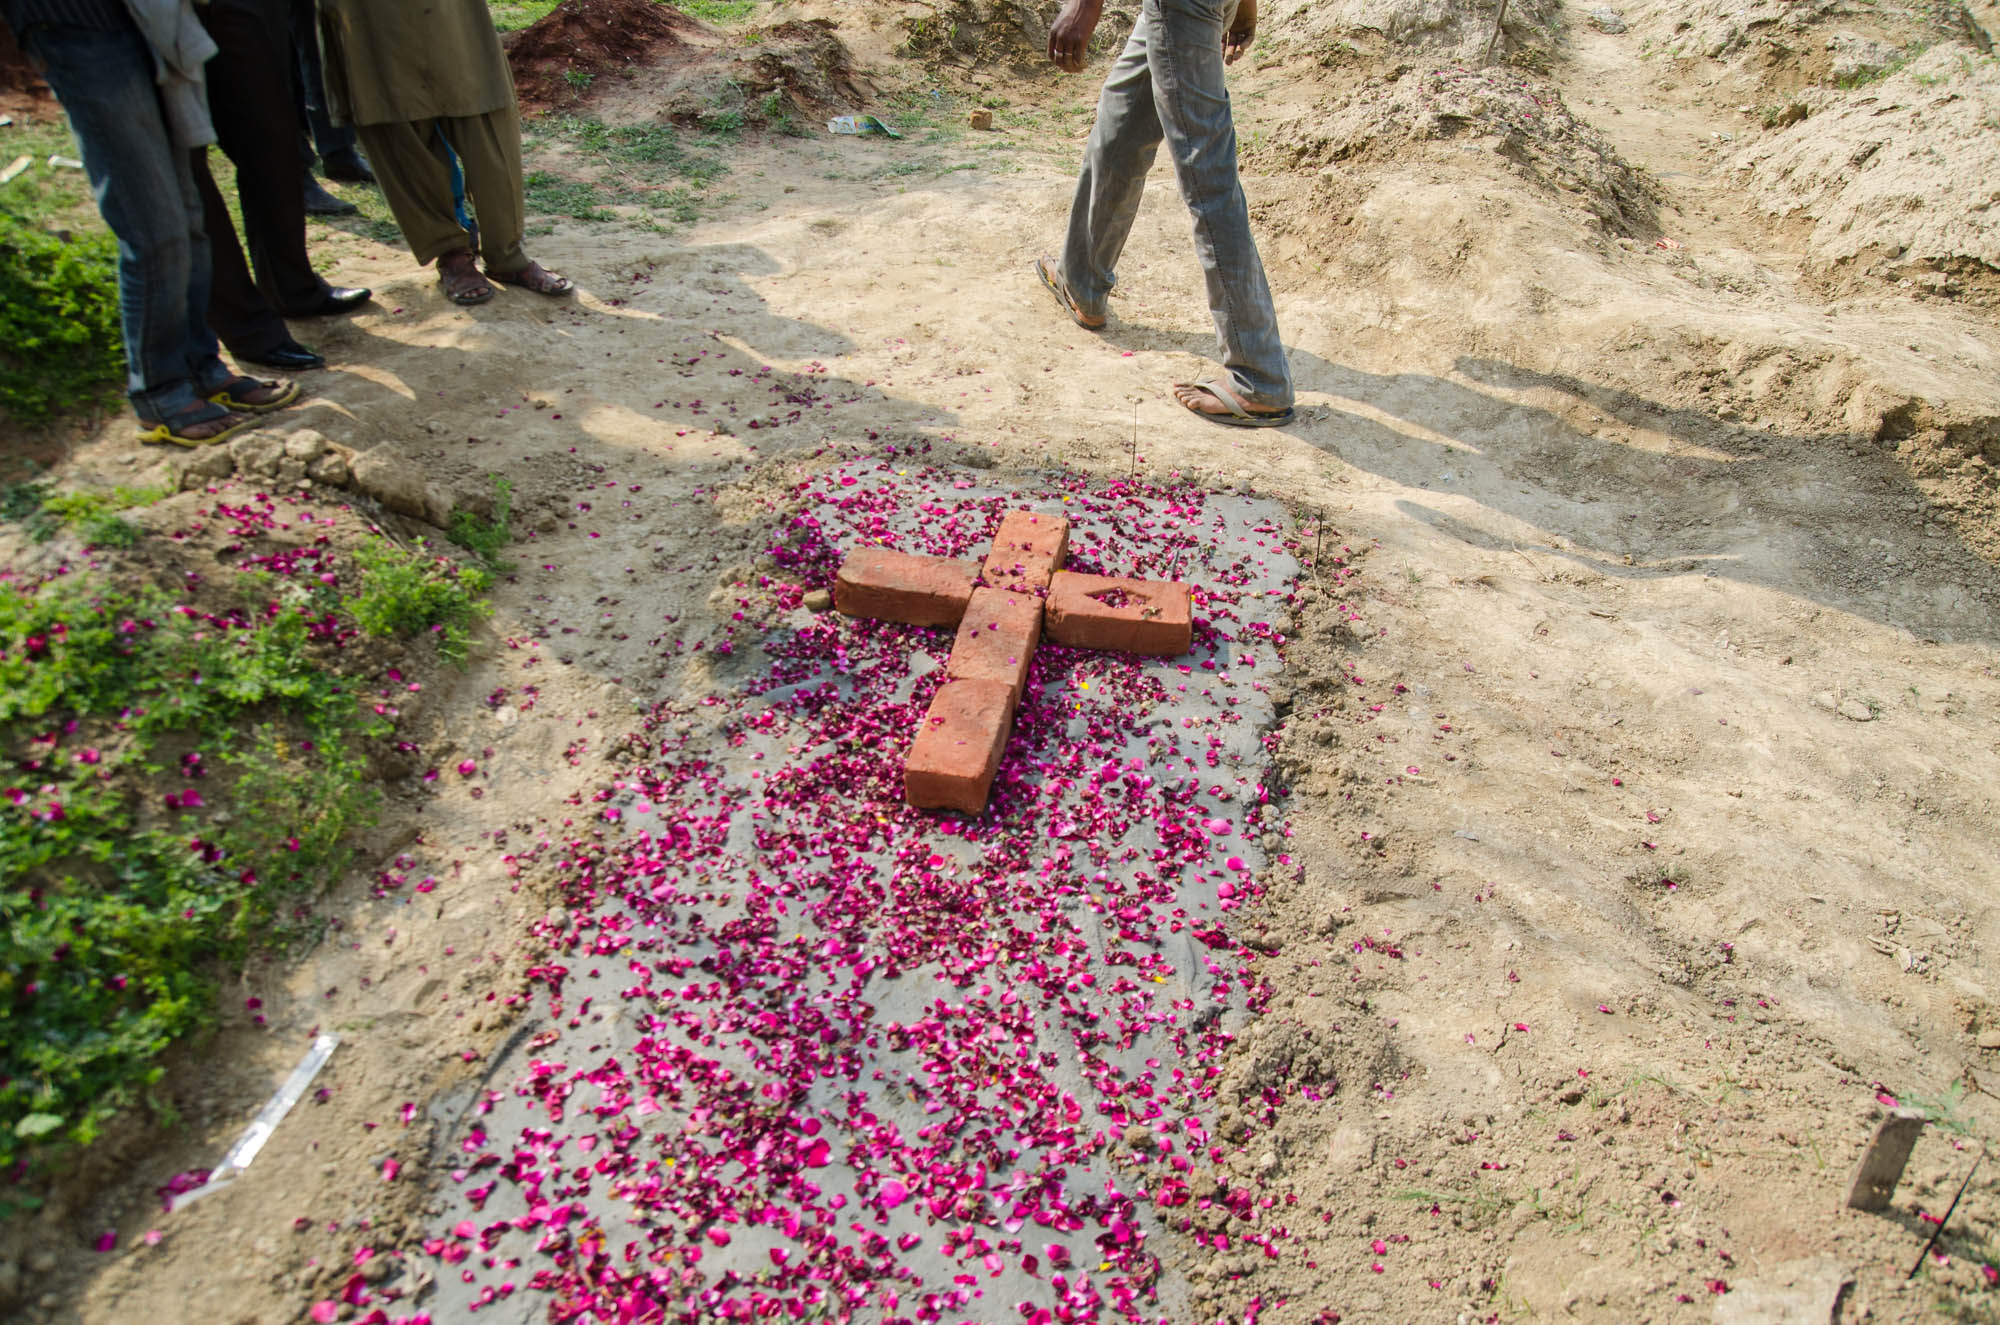  A fresh grave of a victim killed in a suicide attack in Lahore’s Youhanabad area.  